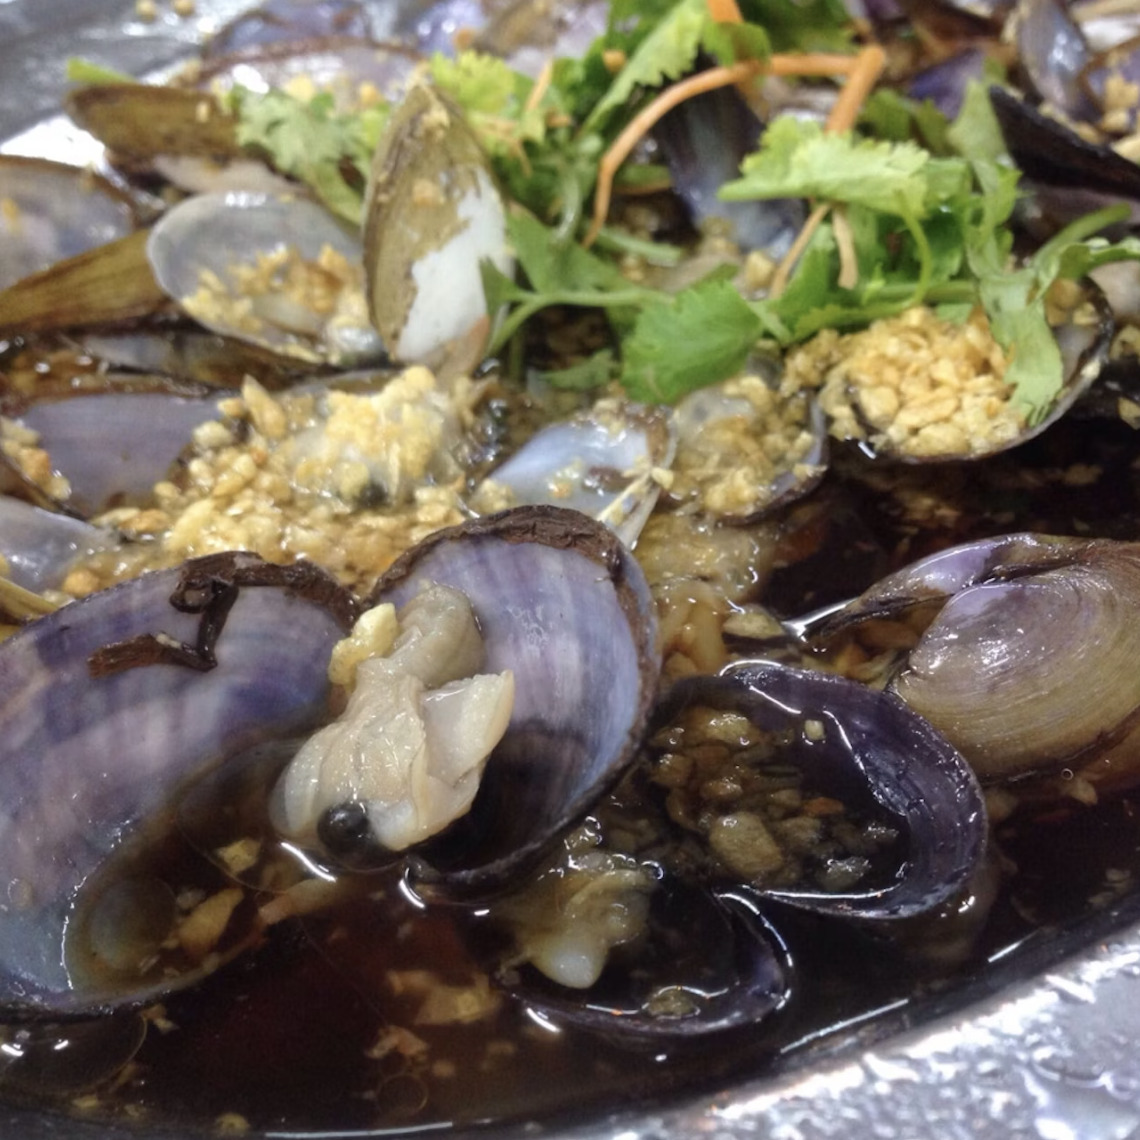 83 Seafood Restaurant — Mussels